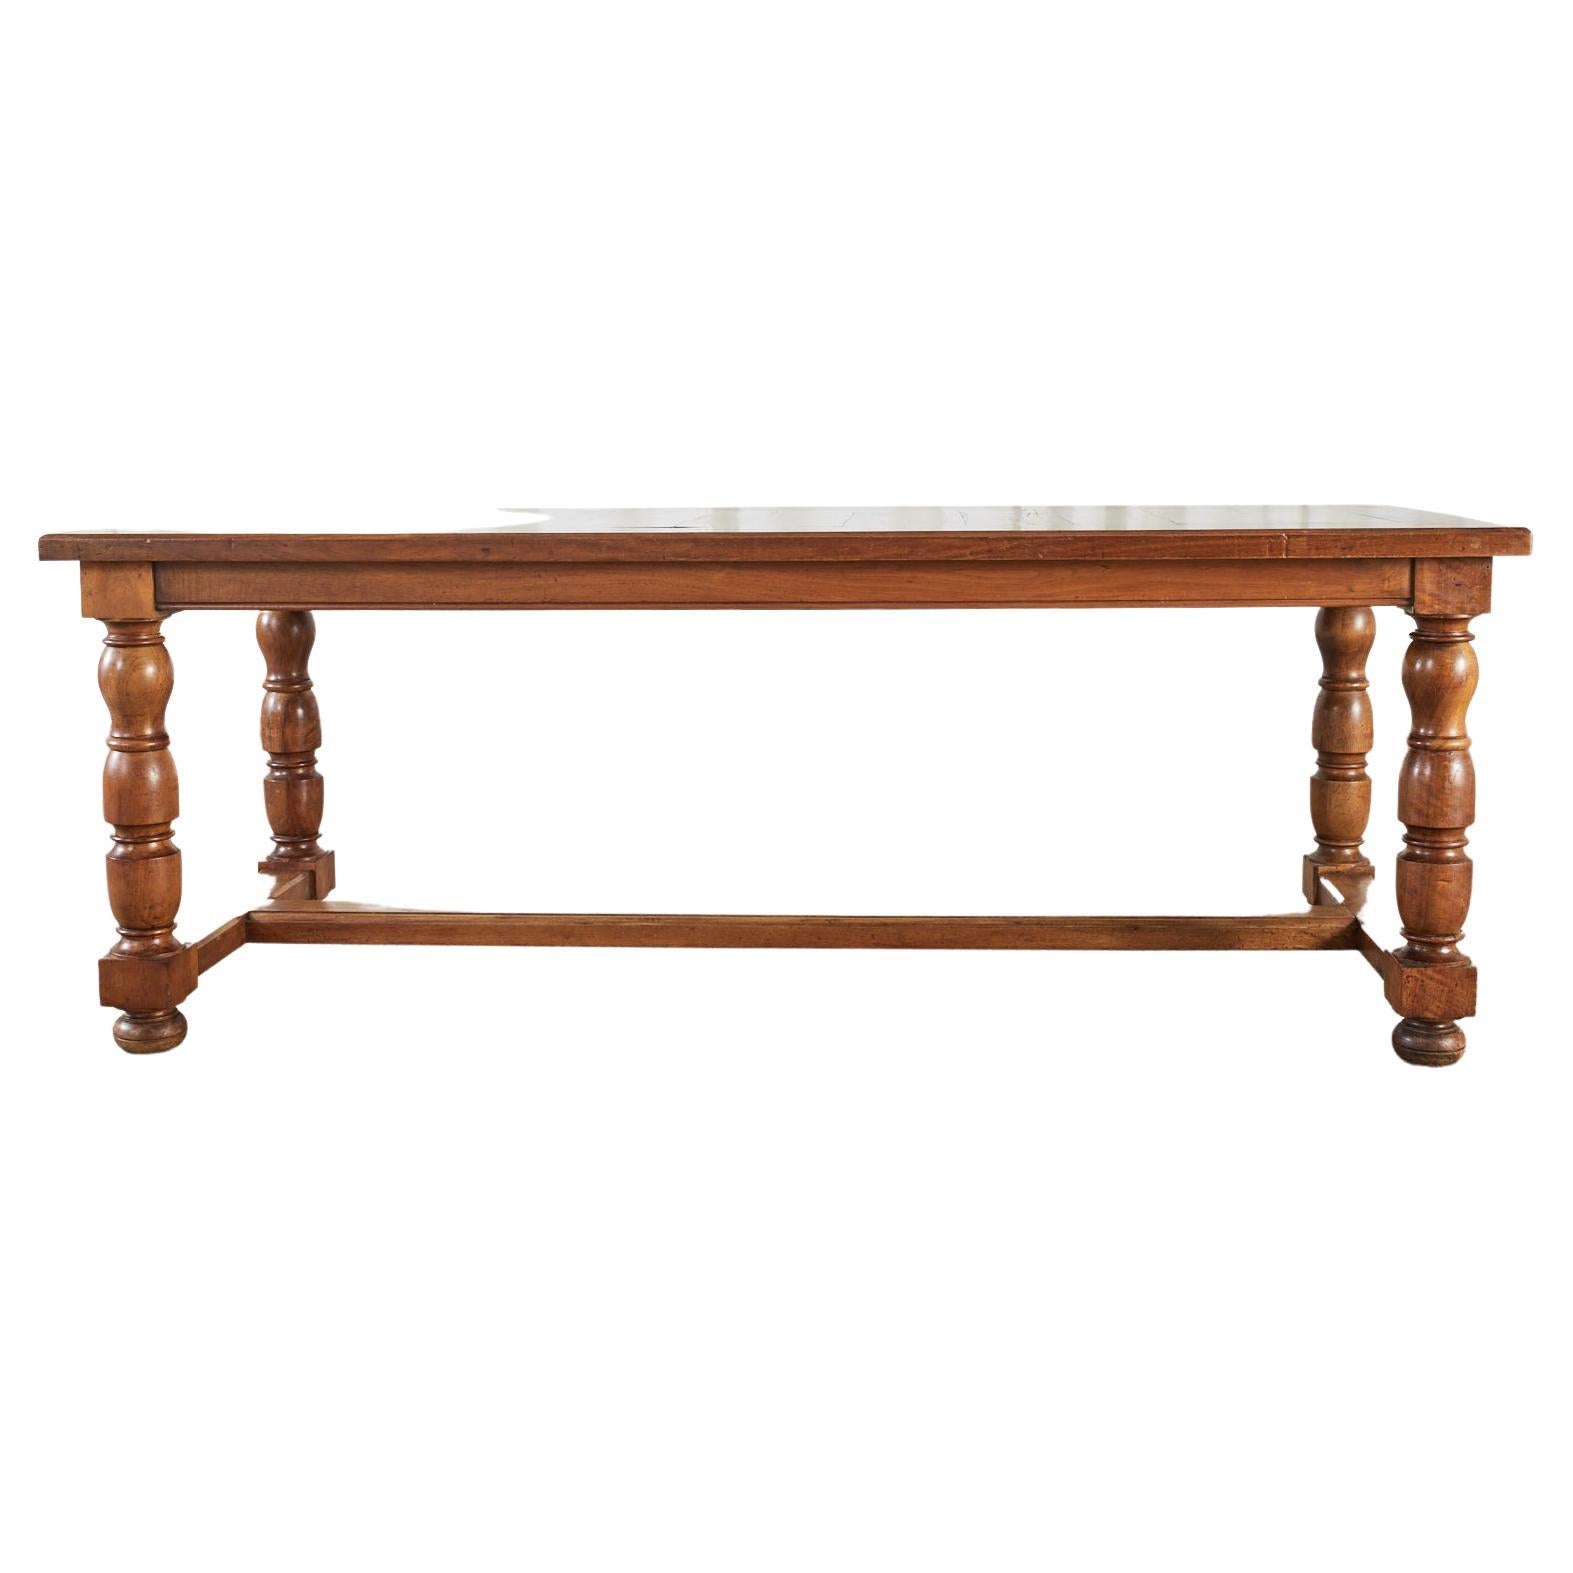 Country French Provincial Fruitwood Farmhouse Trestle Dining Table